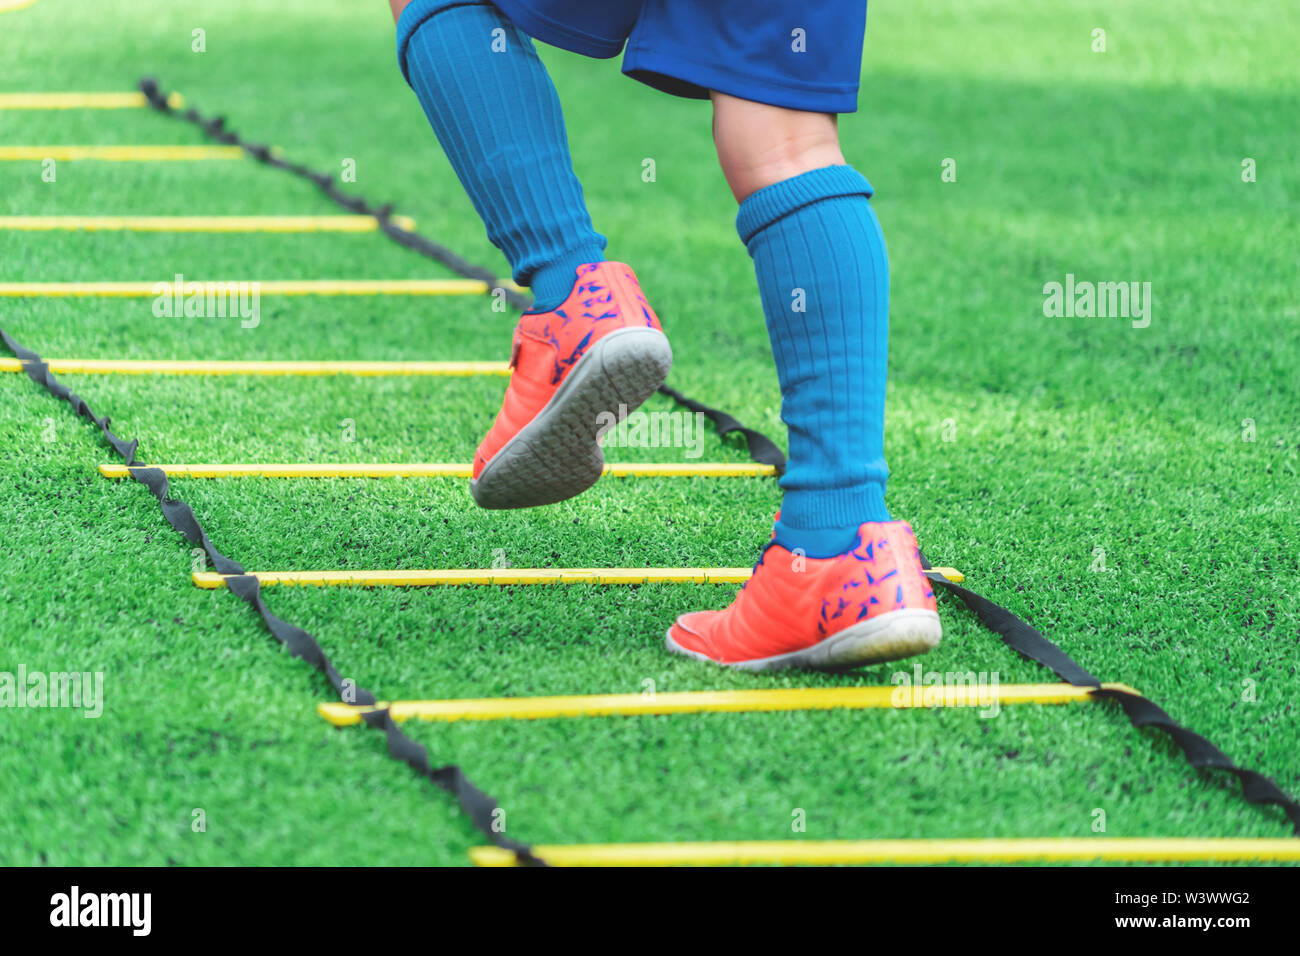 Child feet with soccer boots training on agility speed ladder in soccer training. Stock Photo